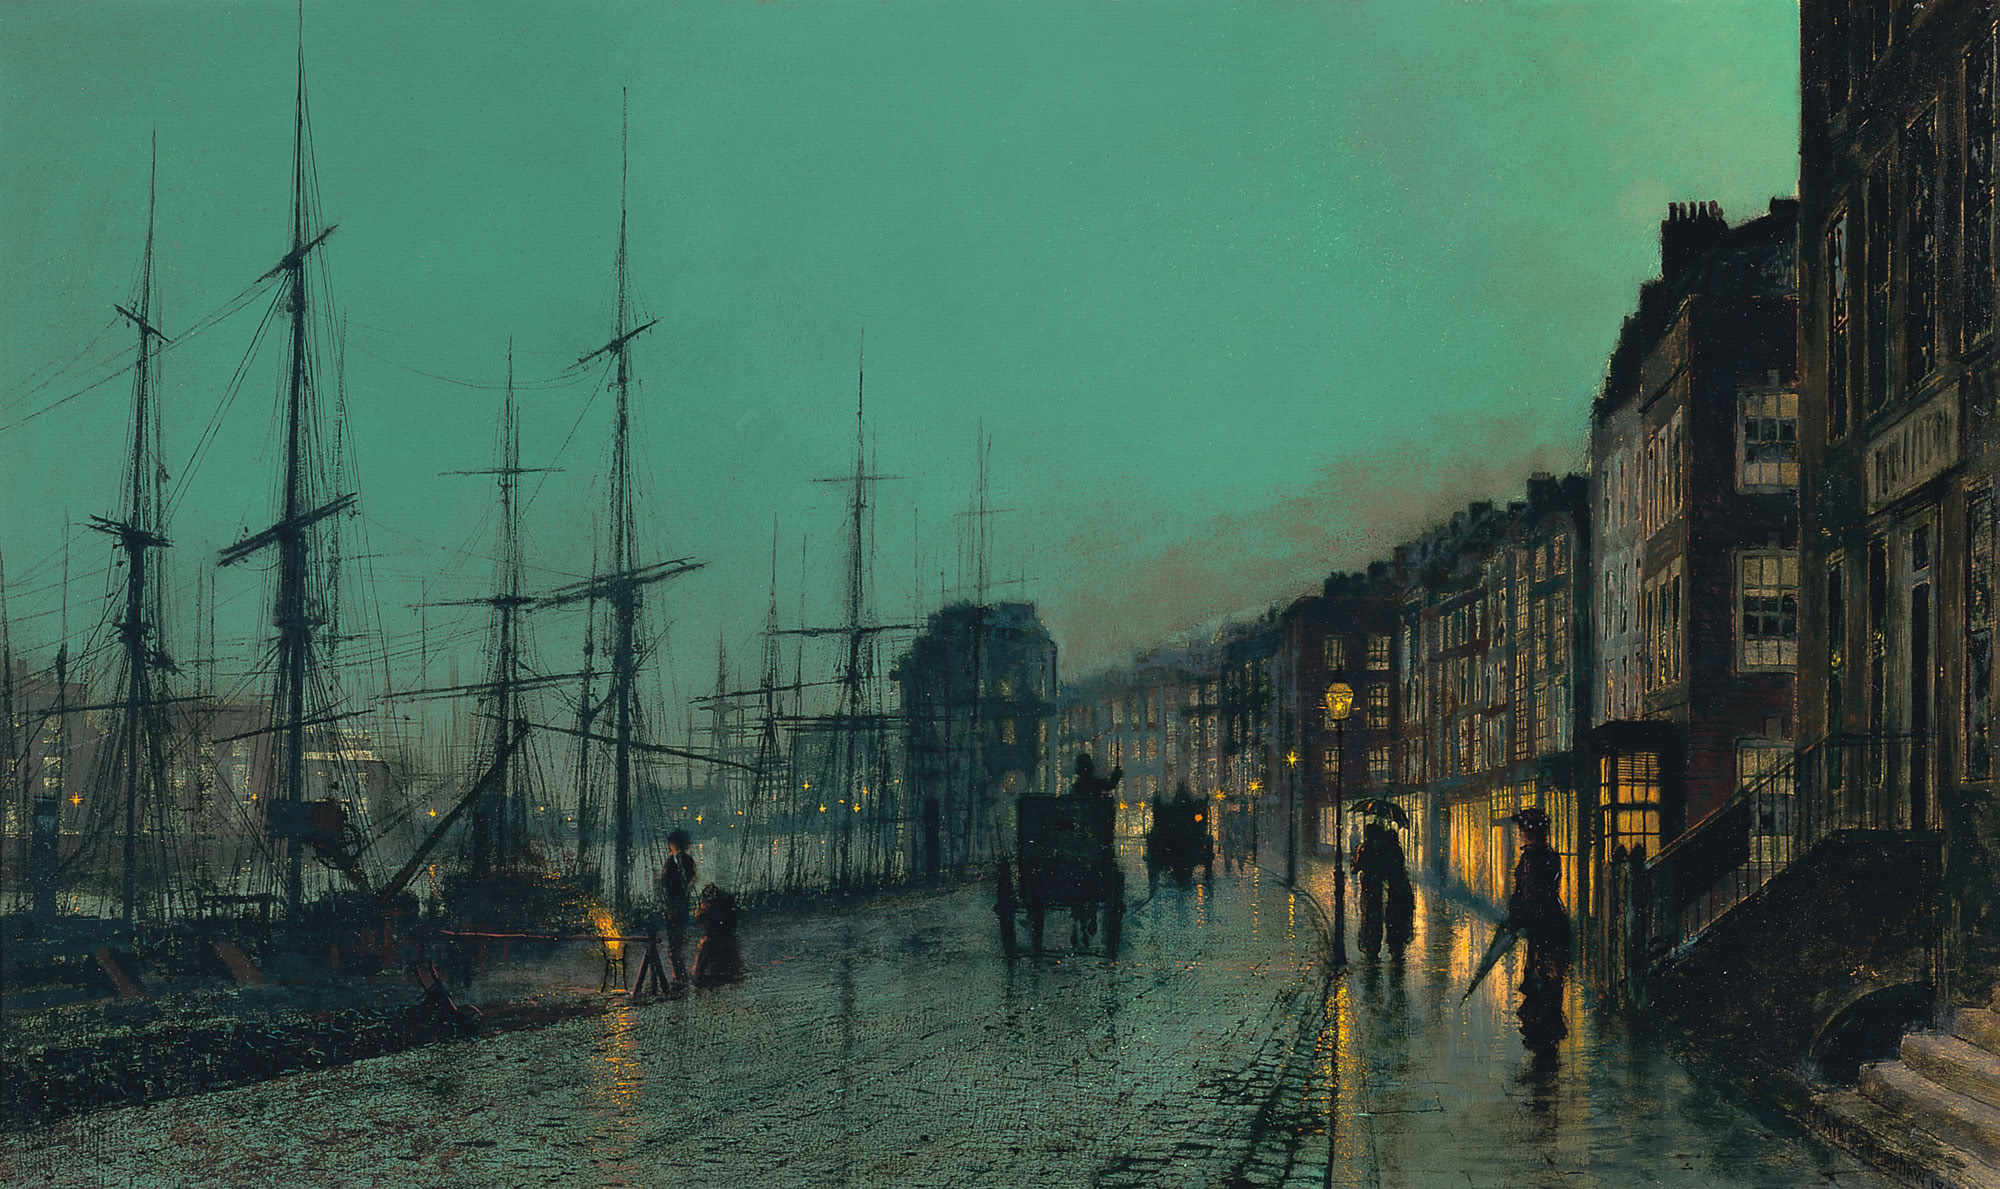 Shipping on the Clyde 1881 by John Atkinson Grimshaw